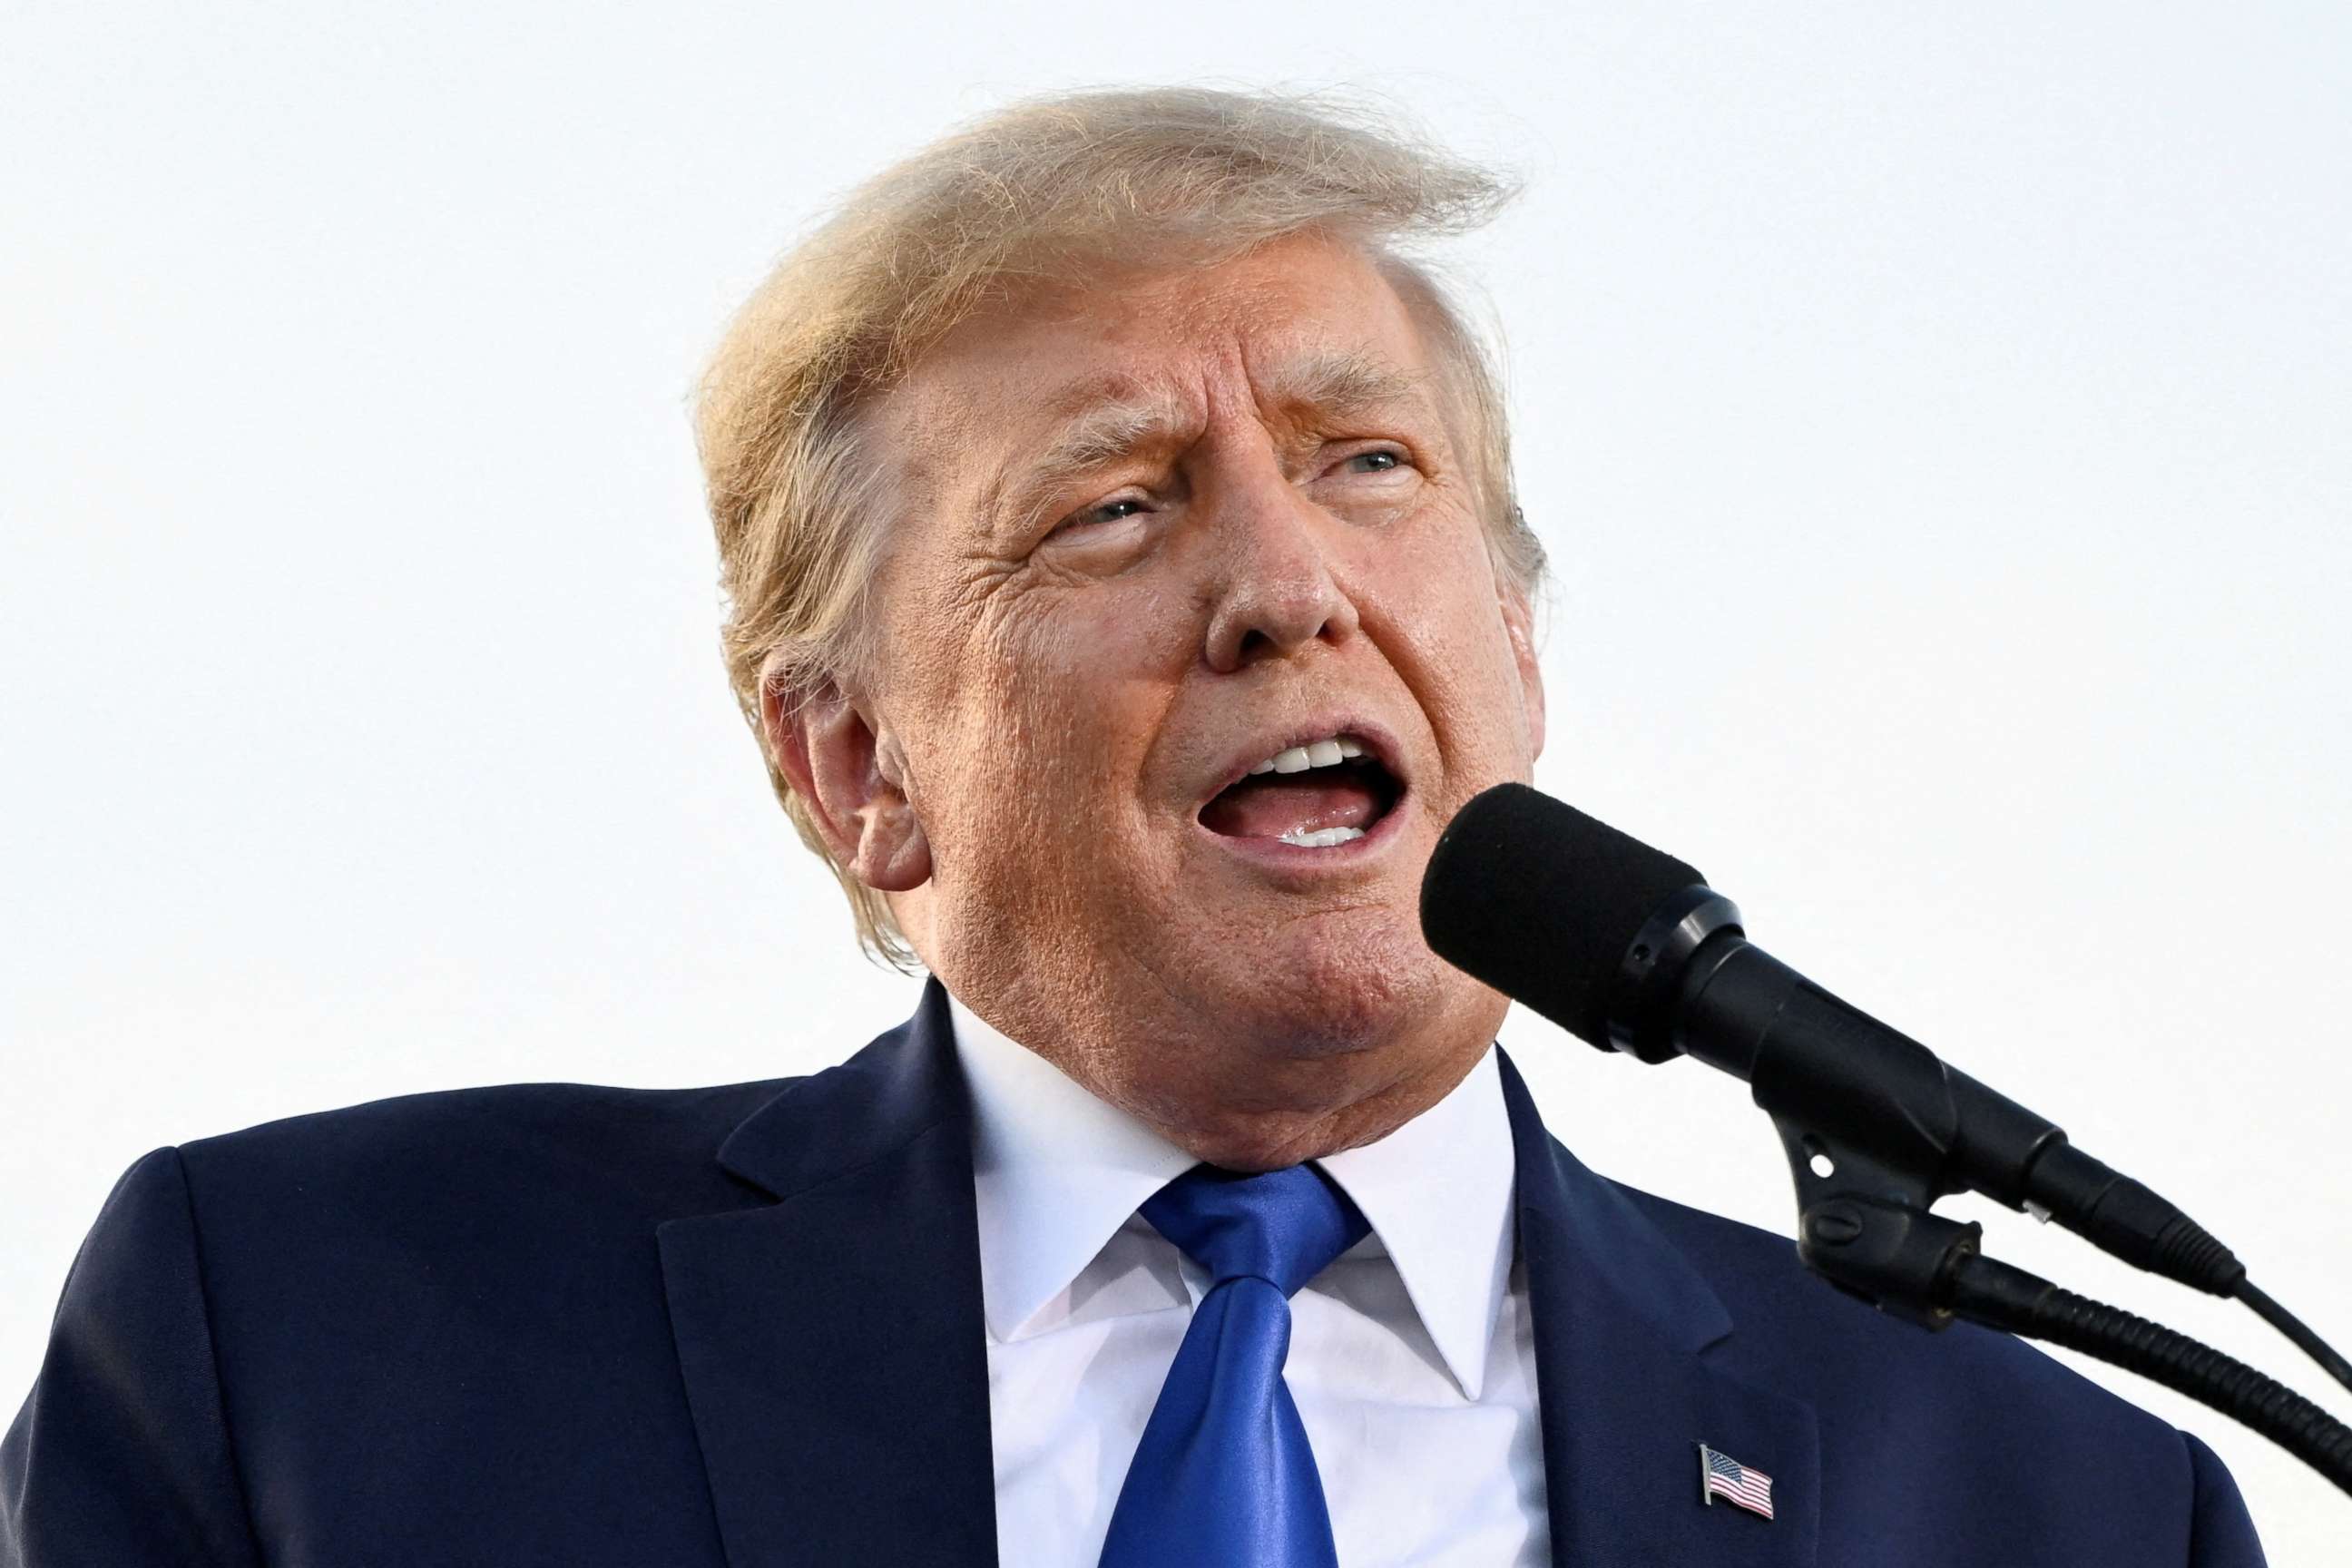 PHOTO: Former U.S. President Donald Trump speaks during a rally to boost Ohio Republican candidates ahead of their May 3 primary election, at the county fairgrounds in Delaware, Ohio, April 23, 2022. 